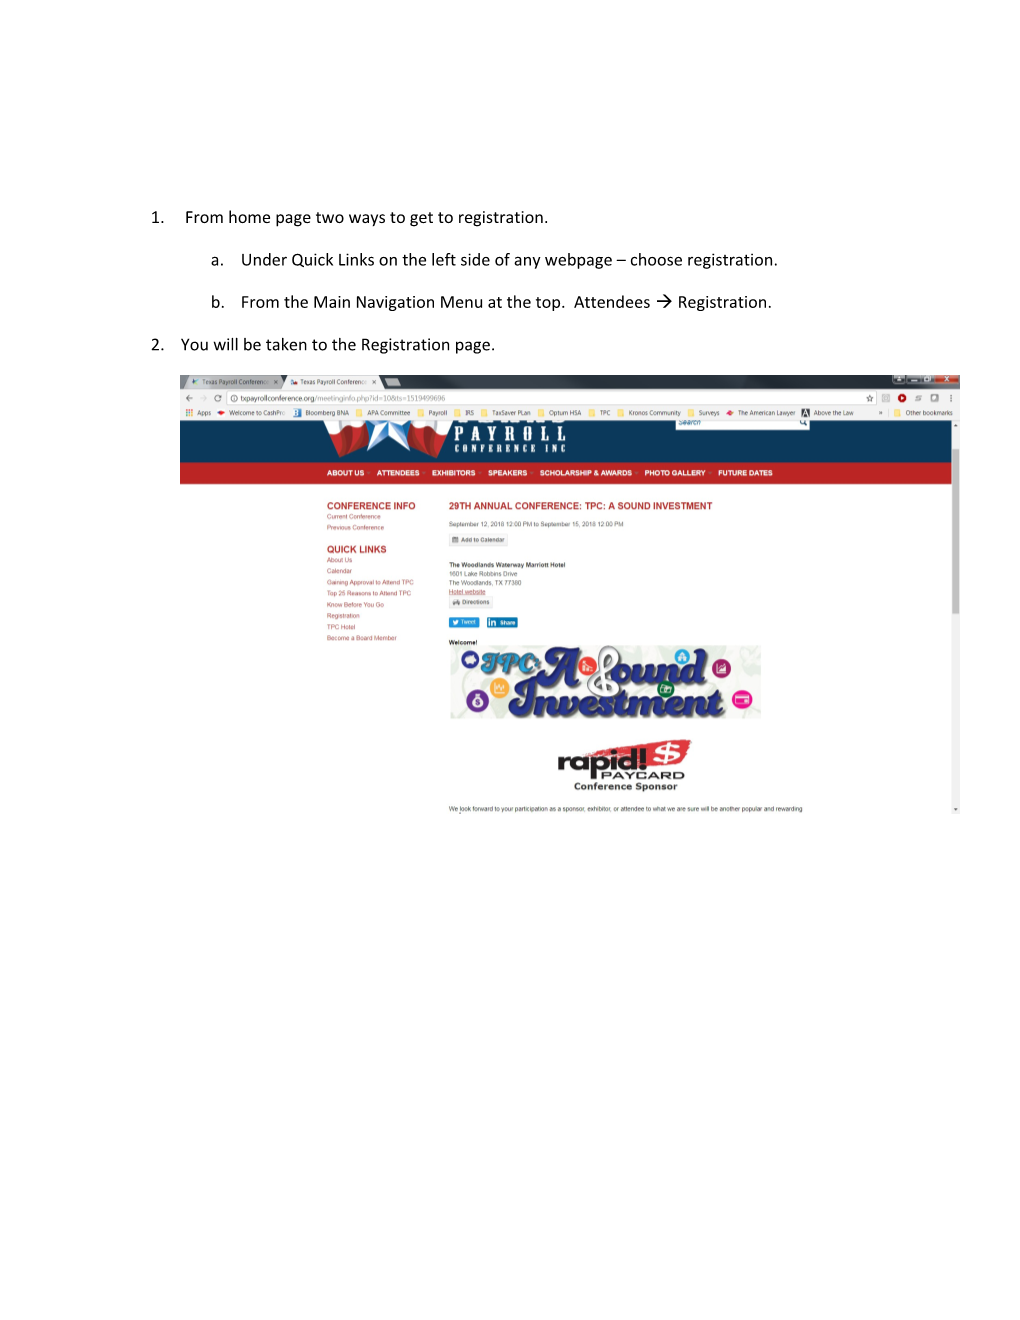 From Home Page Two Ways to Get to Registration